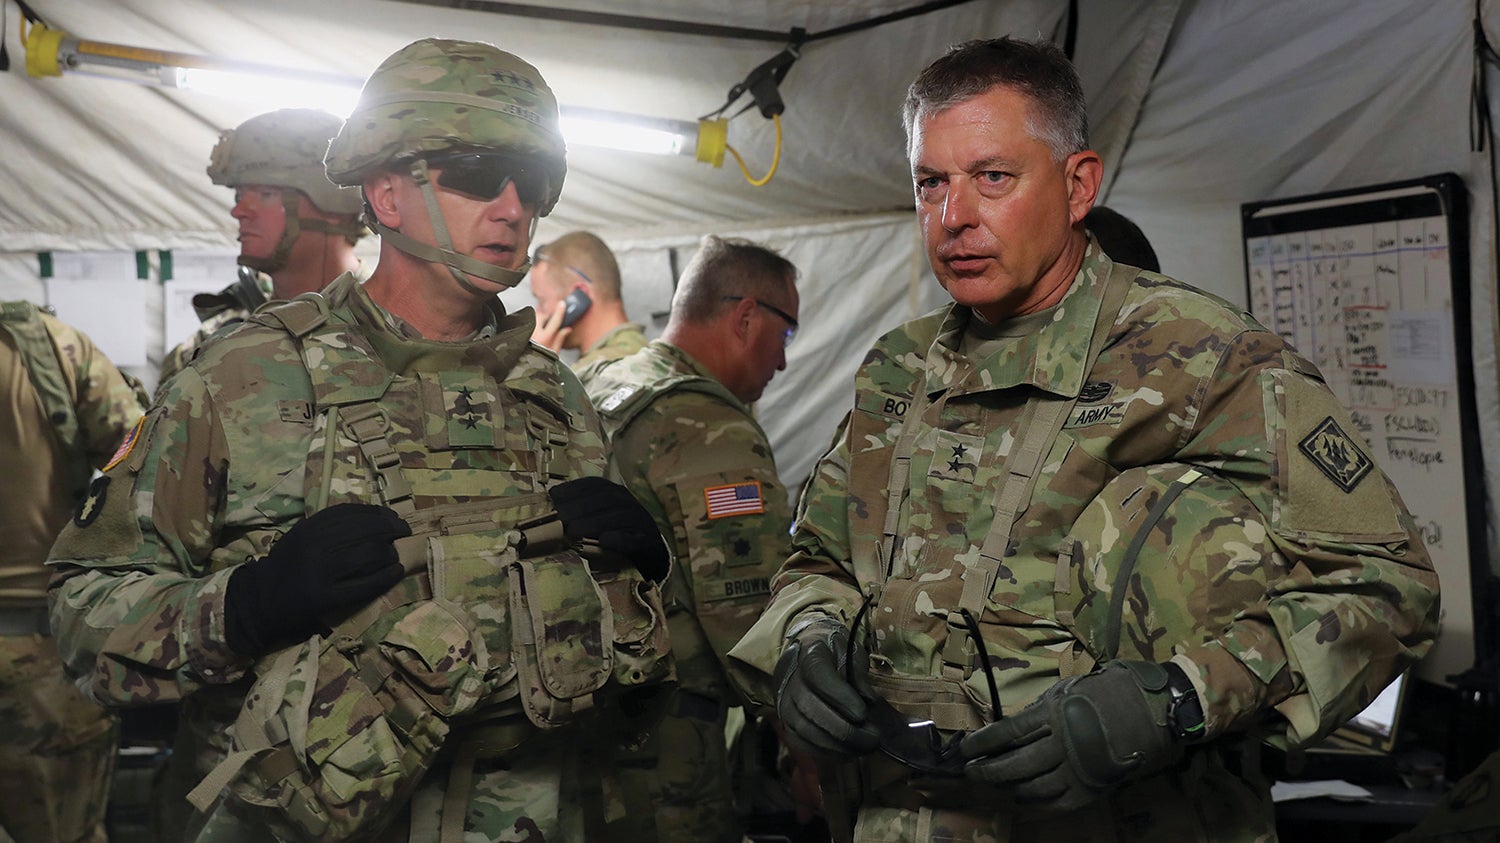 Mississippi National Guard Deployment Schedule 2022 Big Moments: Guard Leader Presides Over Busy Year, Reorganization | Ausa